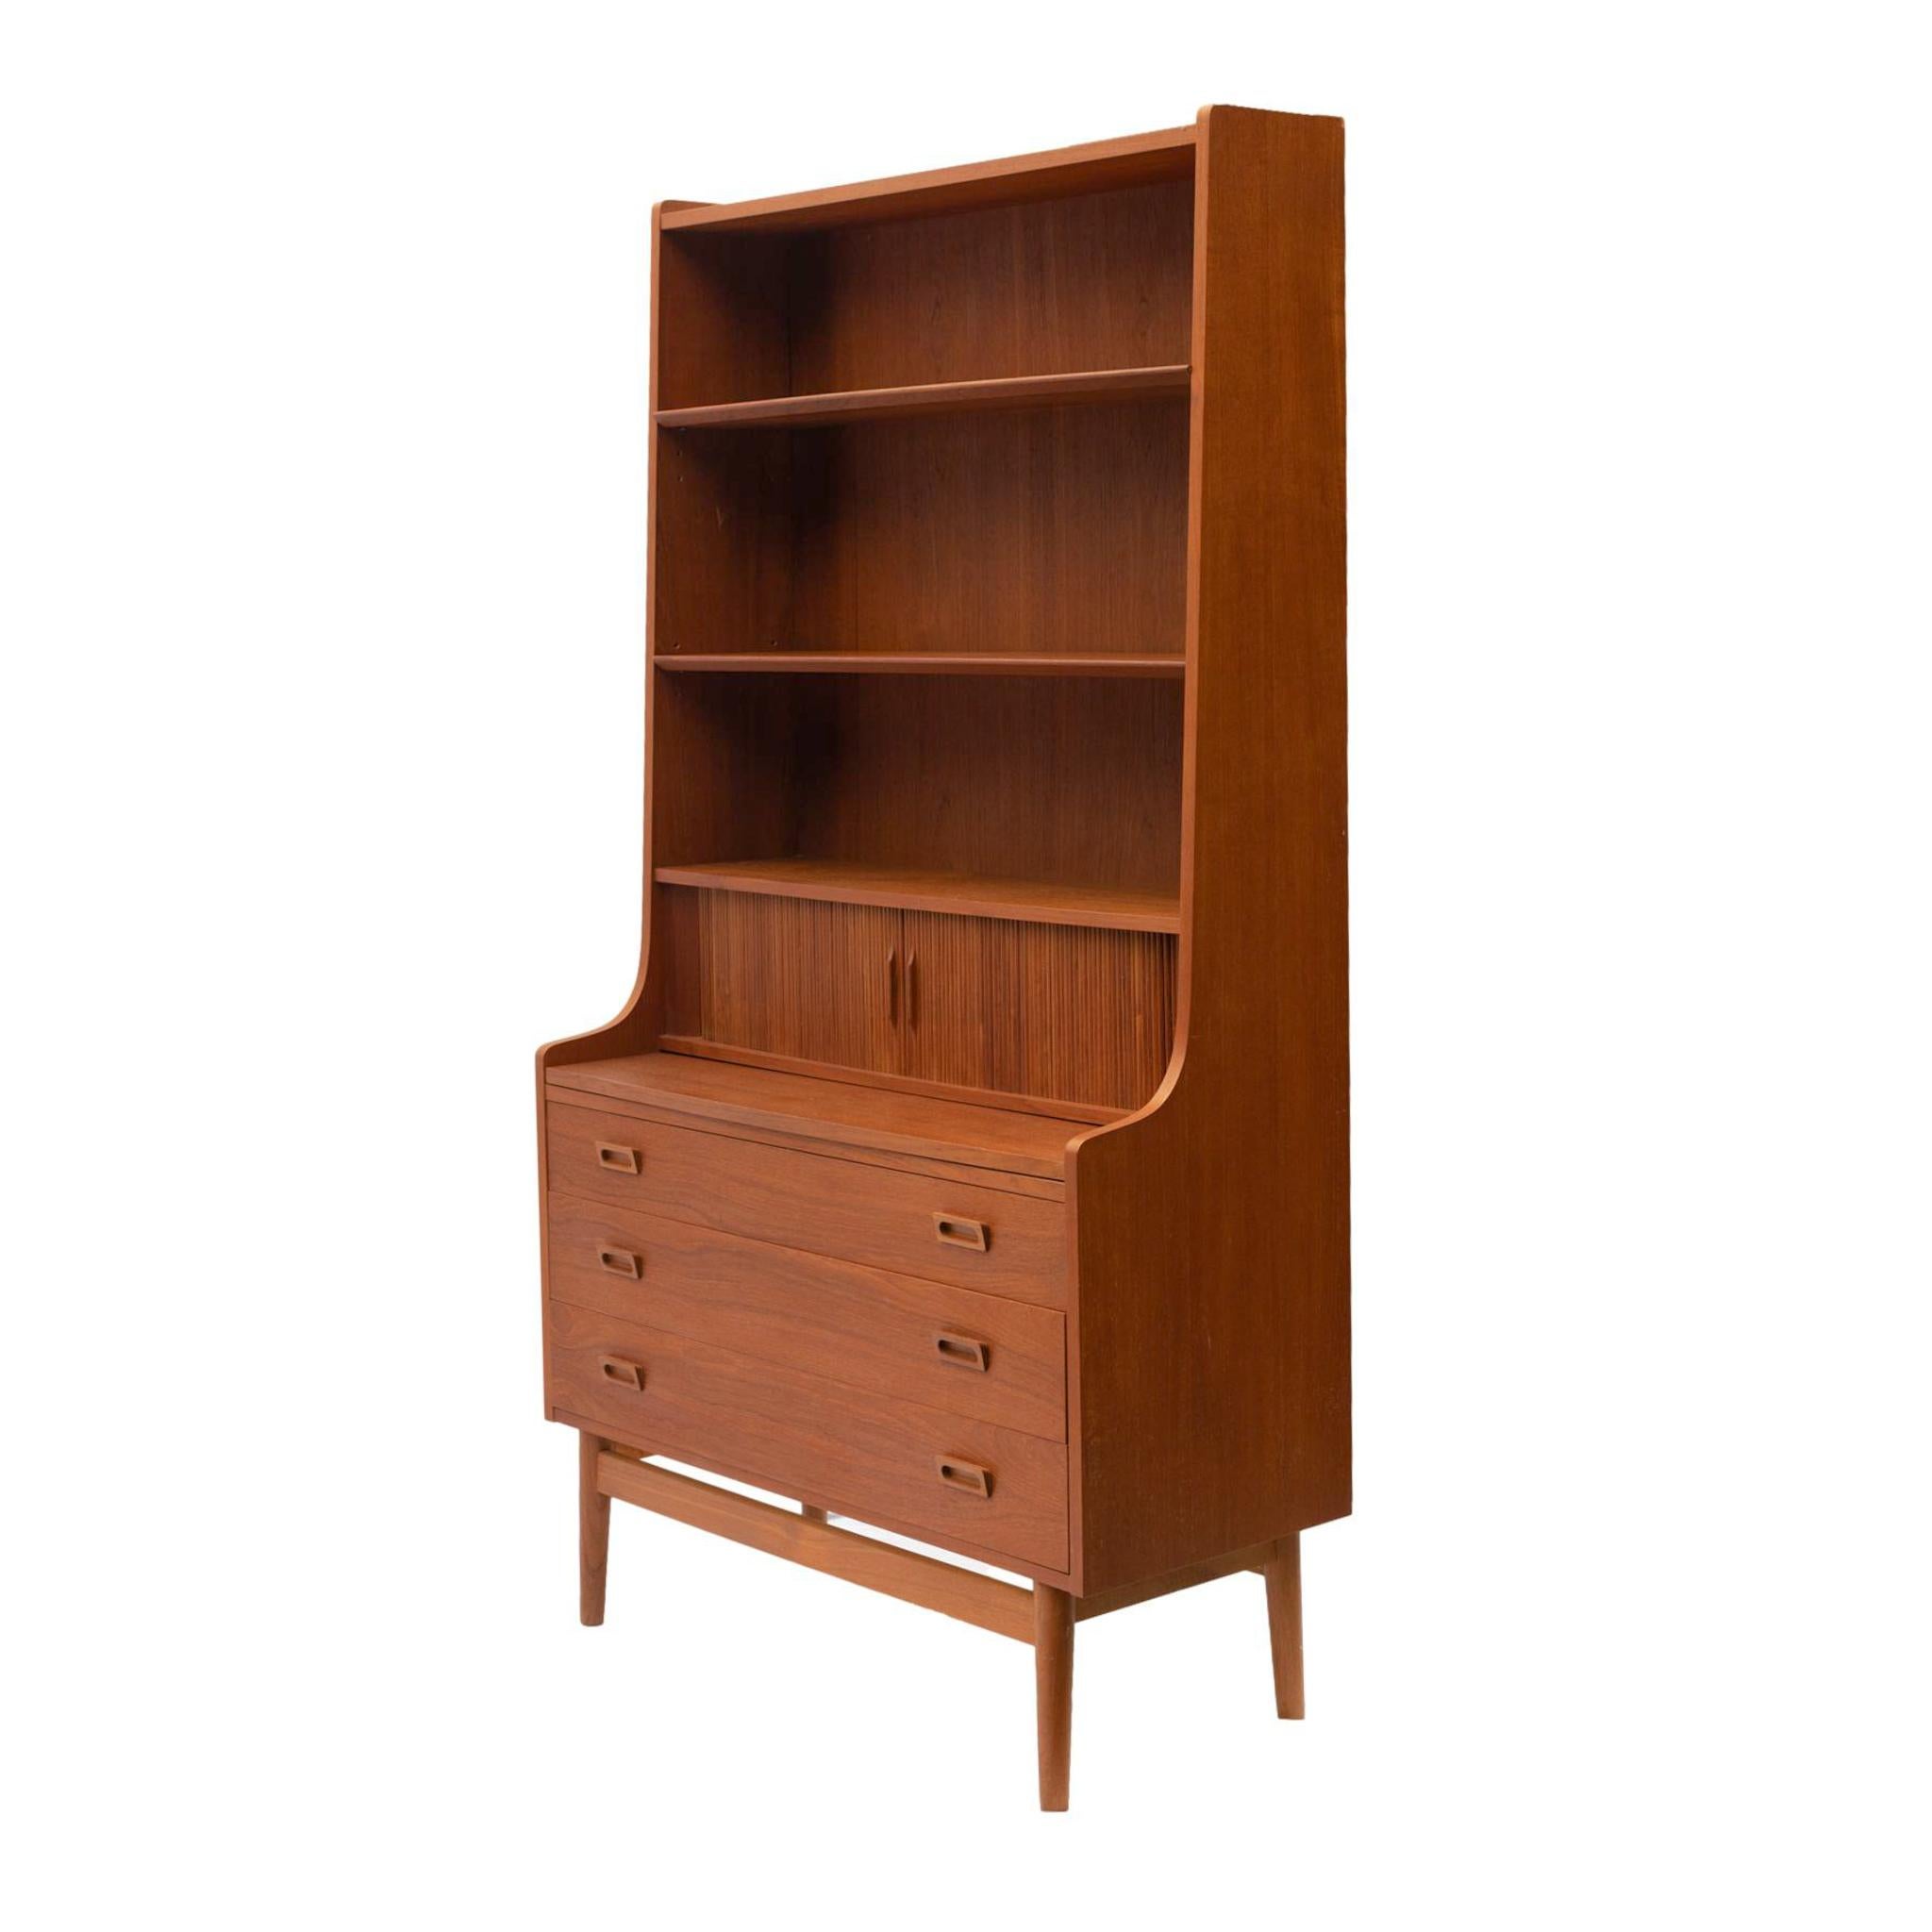 A Danish Modern Teak Secretaire bookcase designed by Johannes Sorth for Bornholm Møbelfabrik , one-part form, with three upper recessed open cabinets with beveled edge shelves over two tambour doors, with divided and fitted drawer interior, the